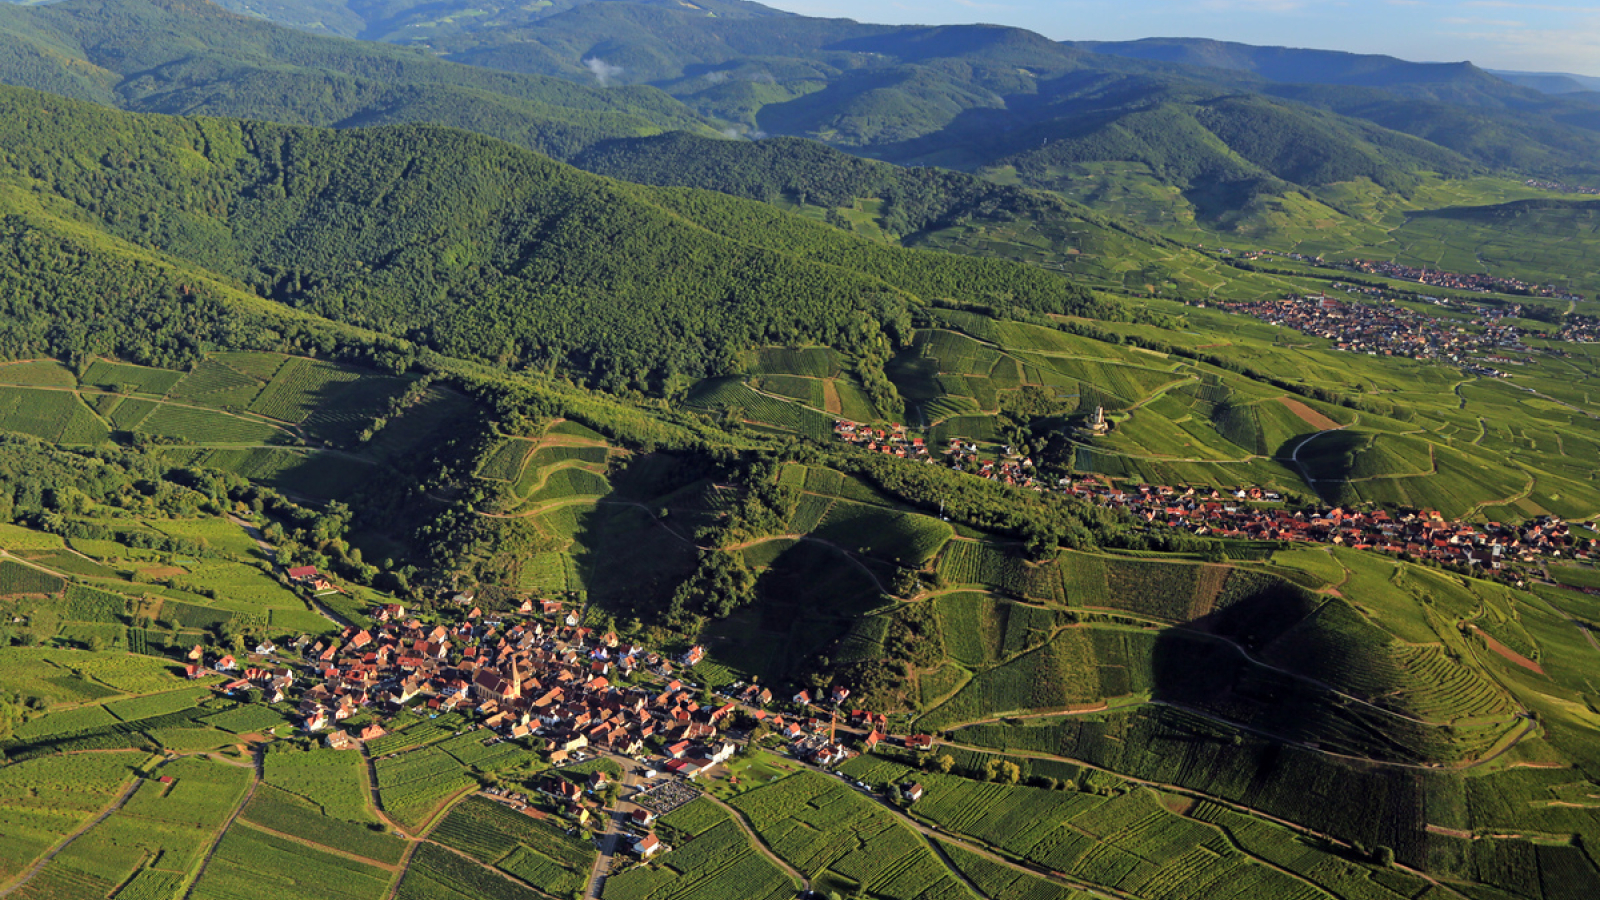 Alsace Wine Route: the ideal wine tour itinerary